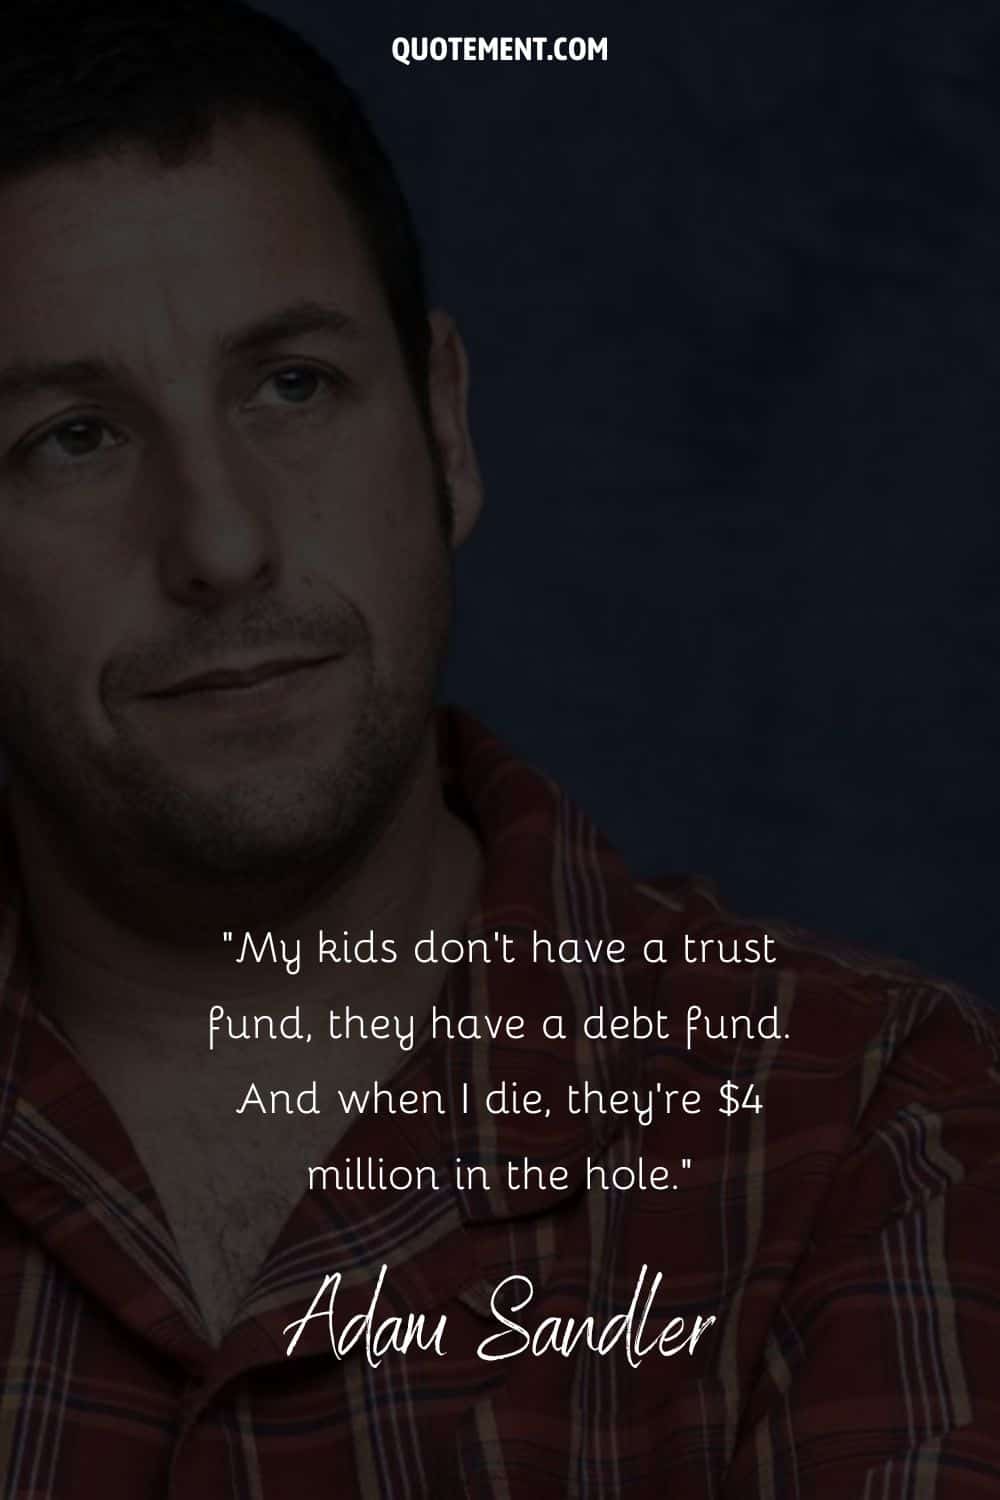 Adam Sandler image with a quote about kids and debts